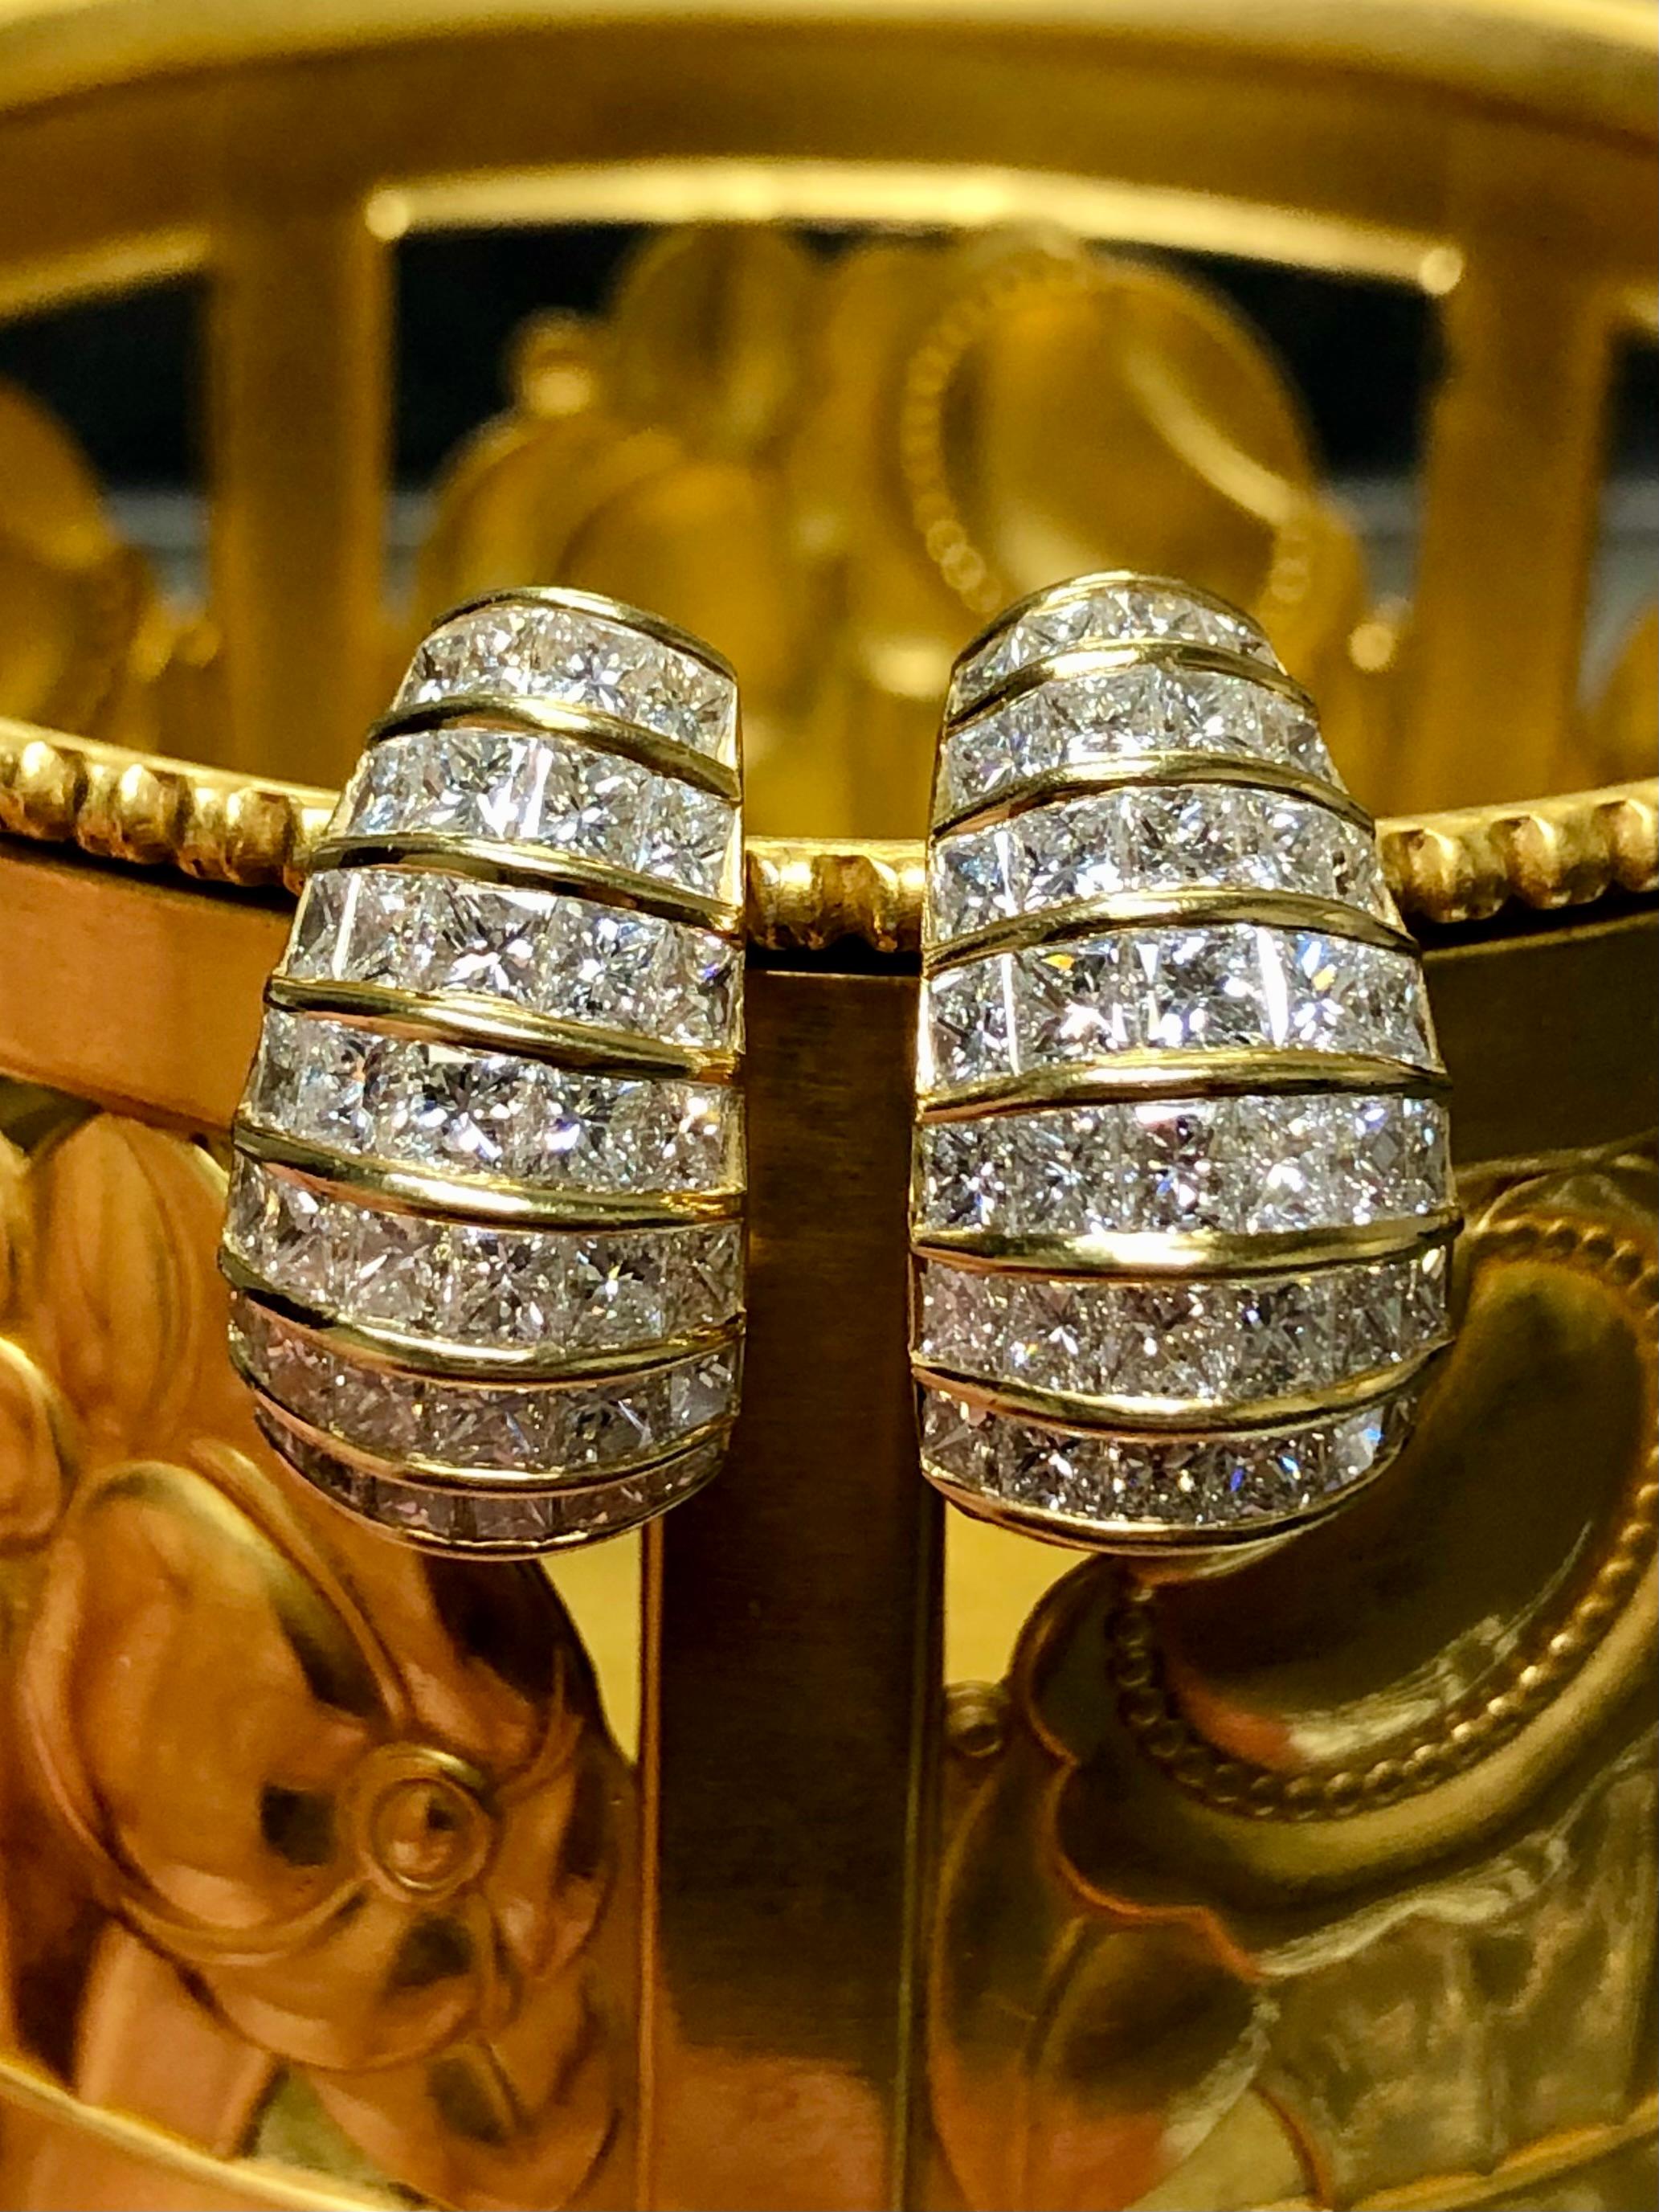 
An impressive pair of Huggies done in 18K yellow gold and set with approximately 7cttw in F-G vs1-2 clarity pricess cut diamonds. The setting is absolutely perfect with no gaps and all stones are perfectly matched. The pictures simply do no do them